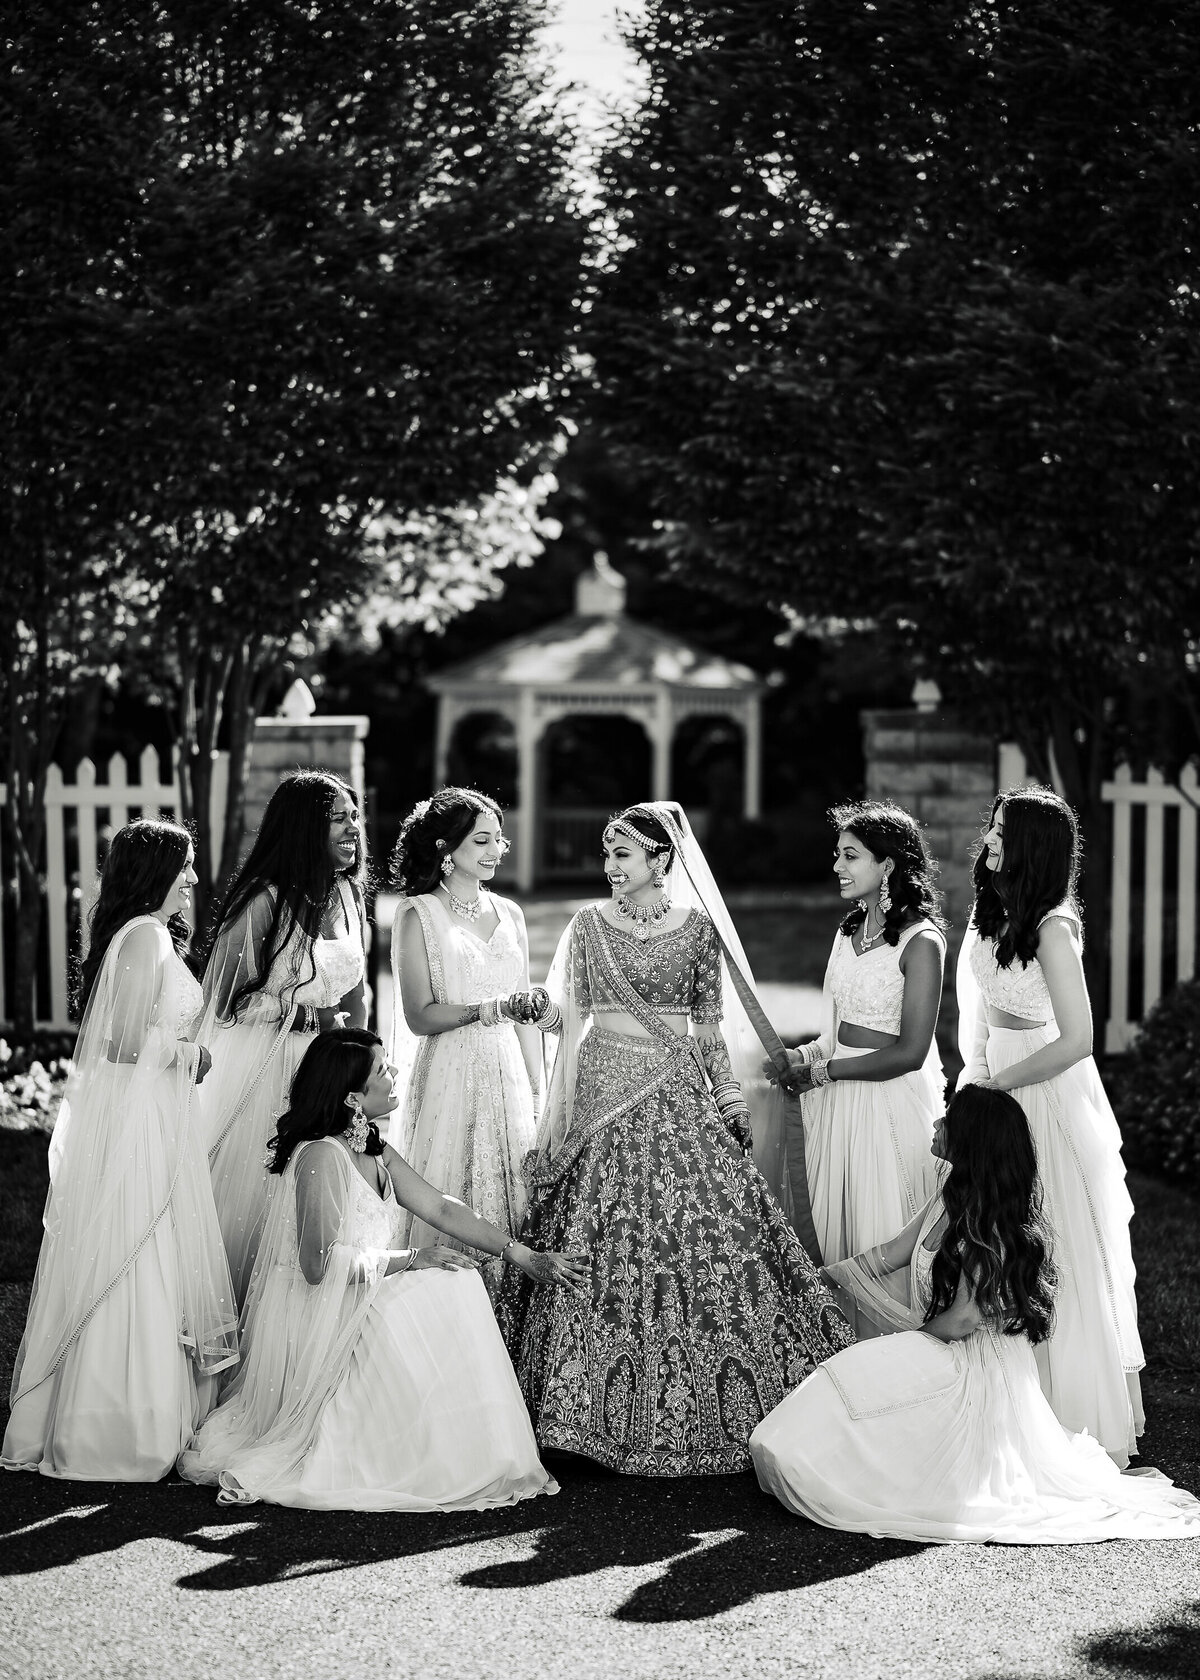 Ishan Fotografi is an expert Sikh wedding photographer in New Jersey.